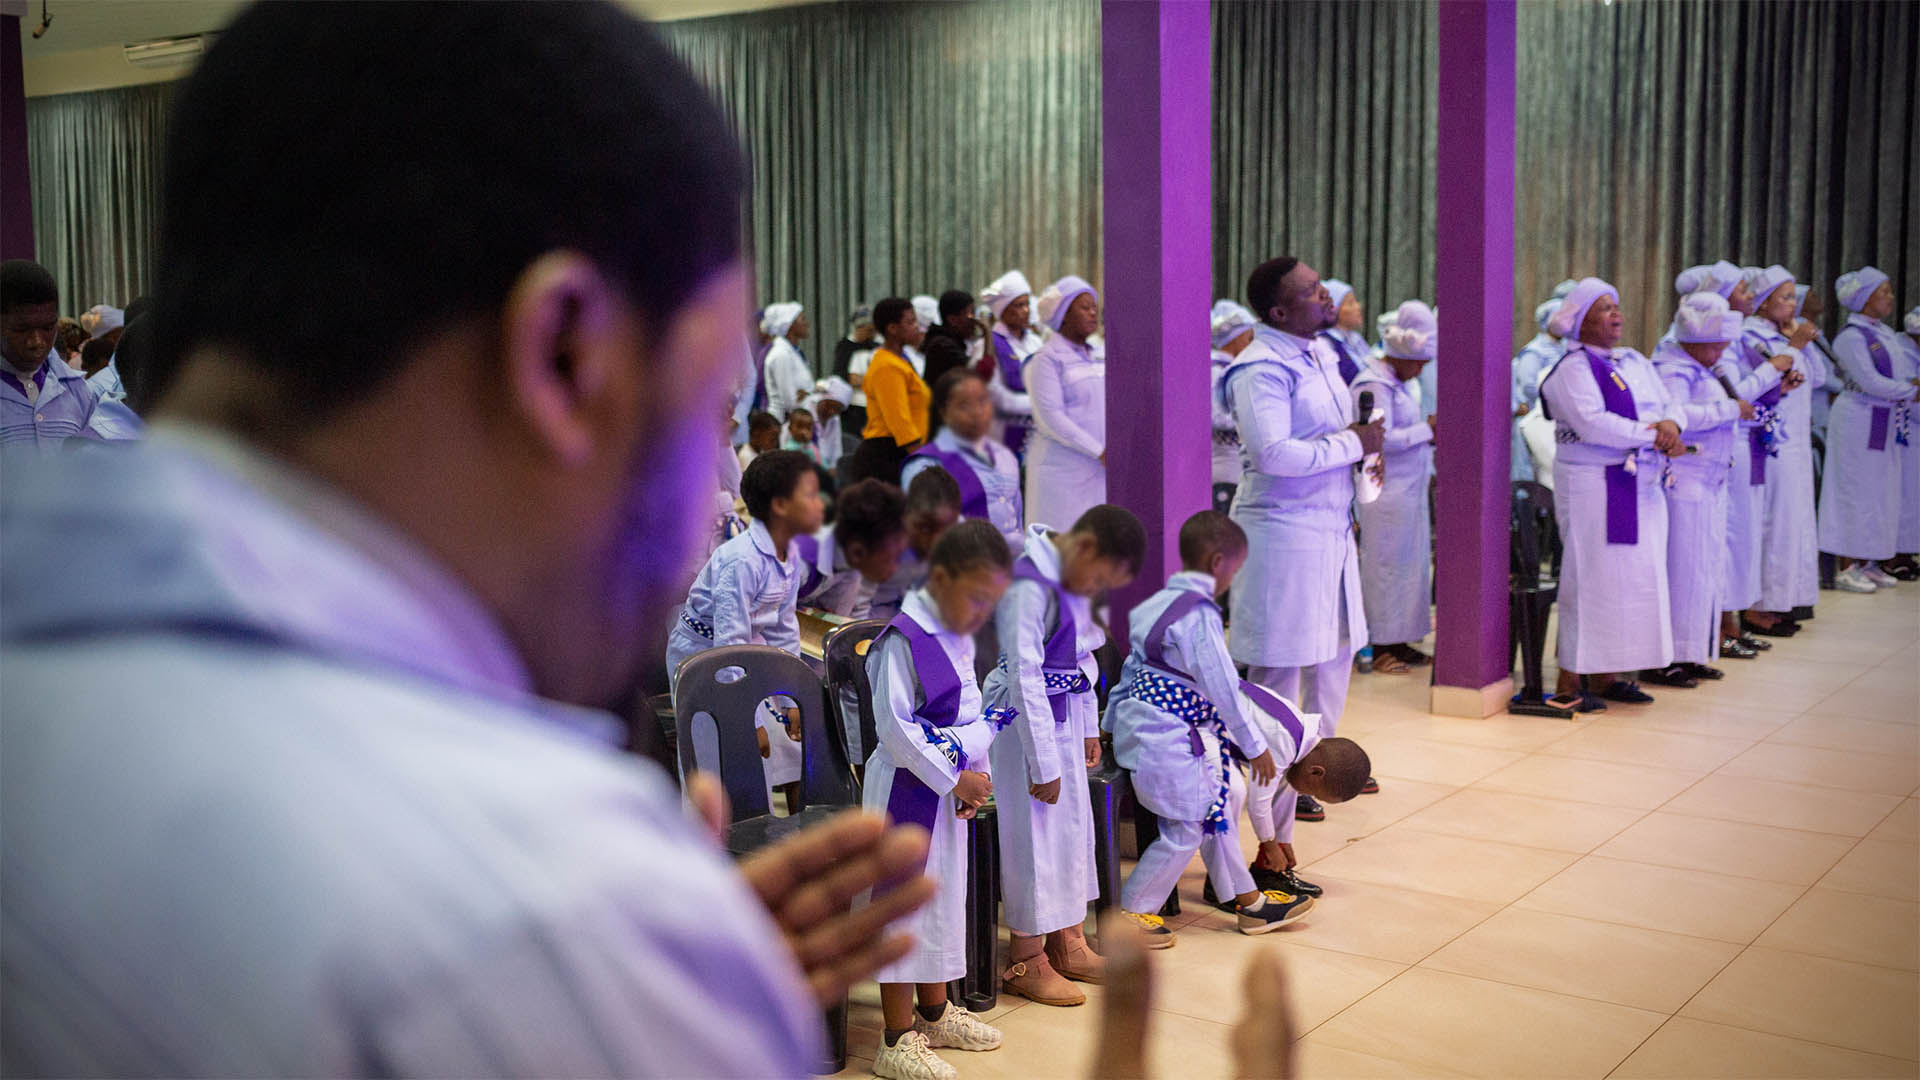 An out-of-focus man in profile in the foreground holds his hands out towards a congregation dressed largely in purple and white robes.